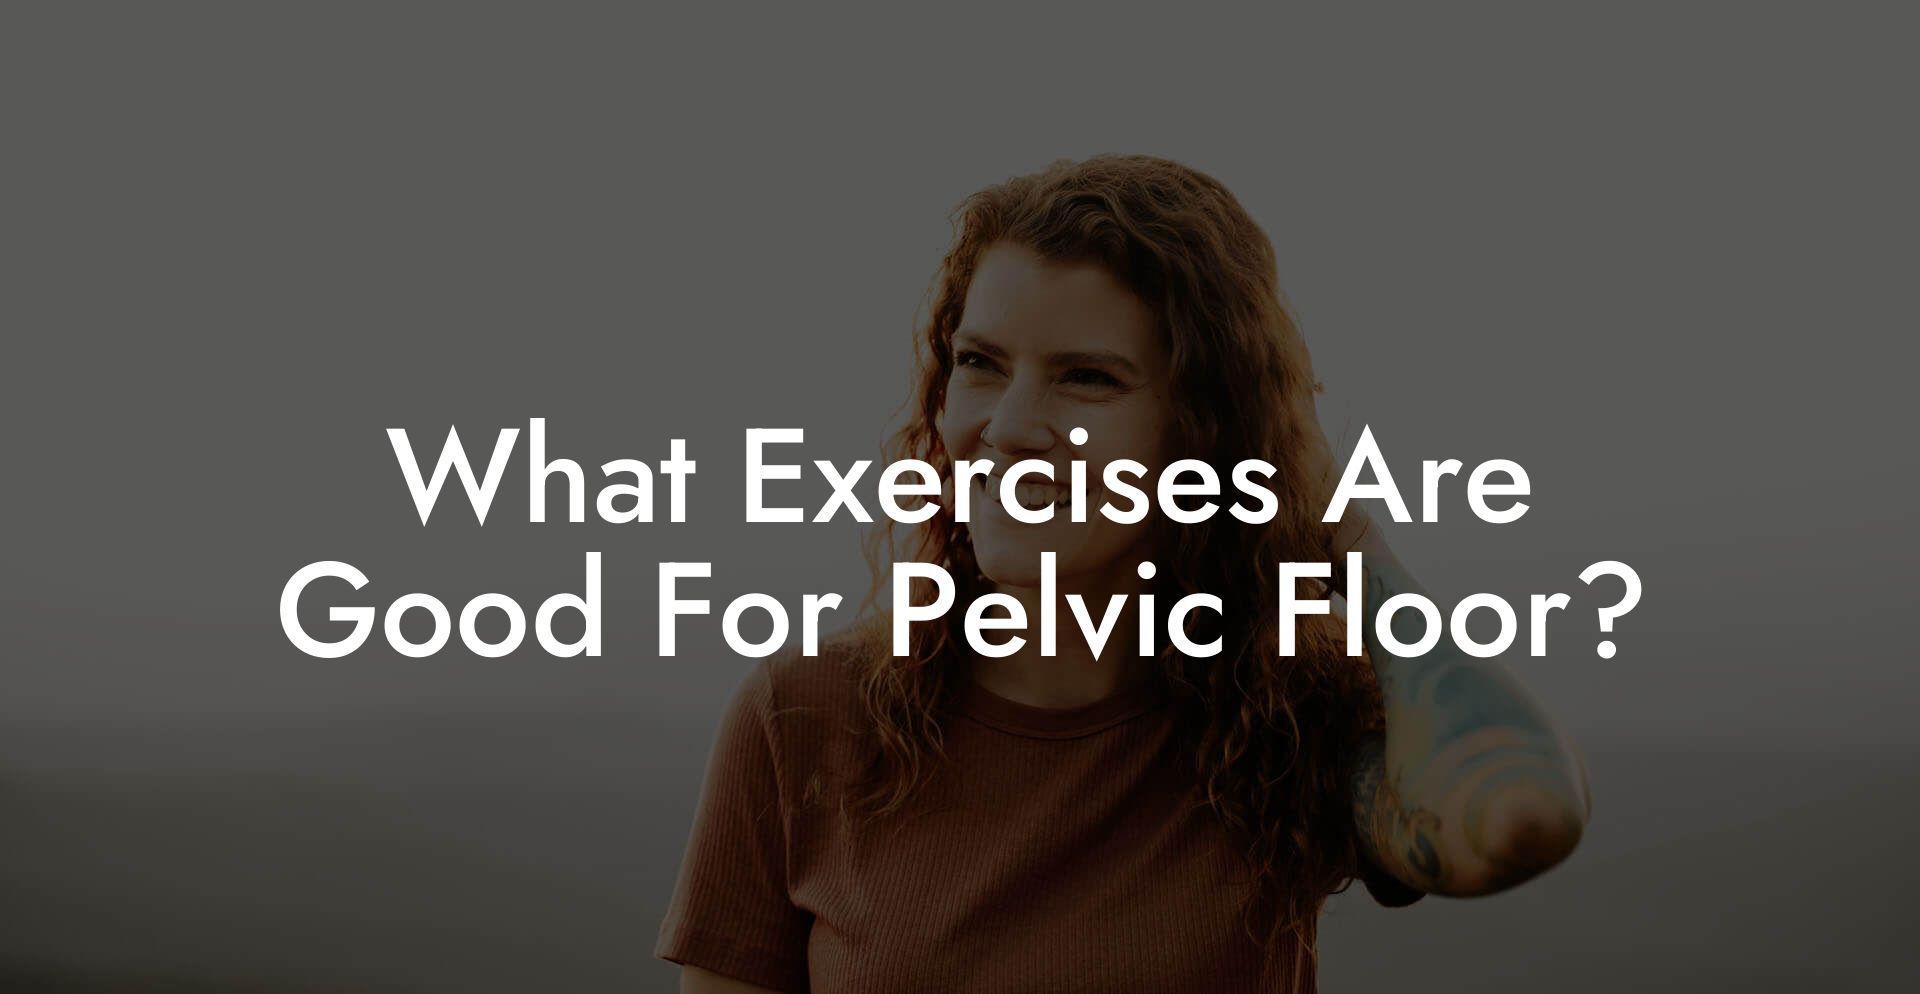 What Exercises Are Good For Pelvic Floor?